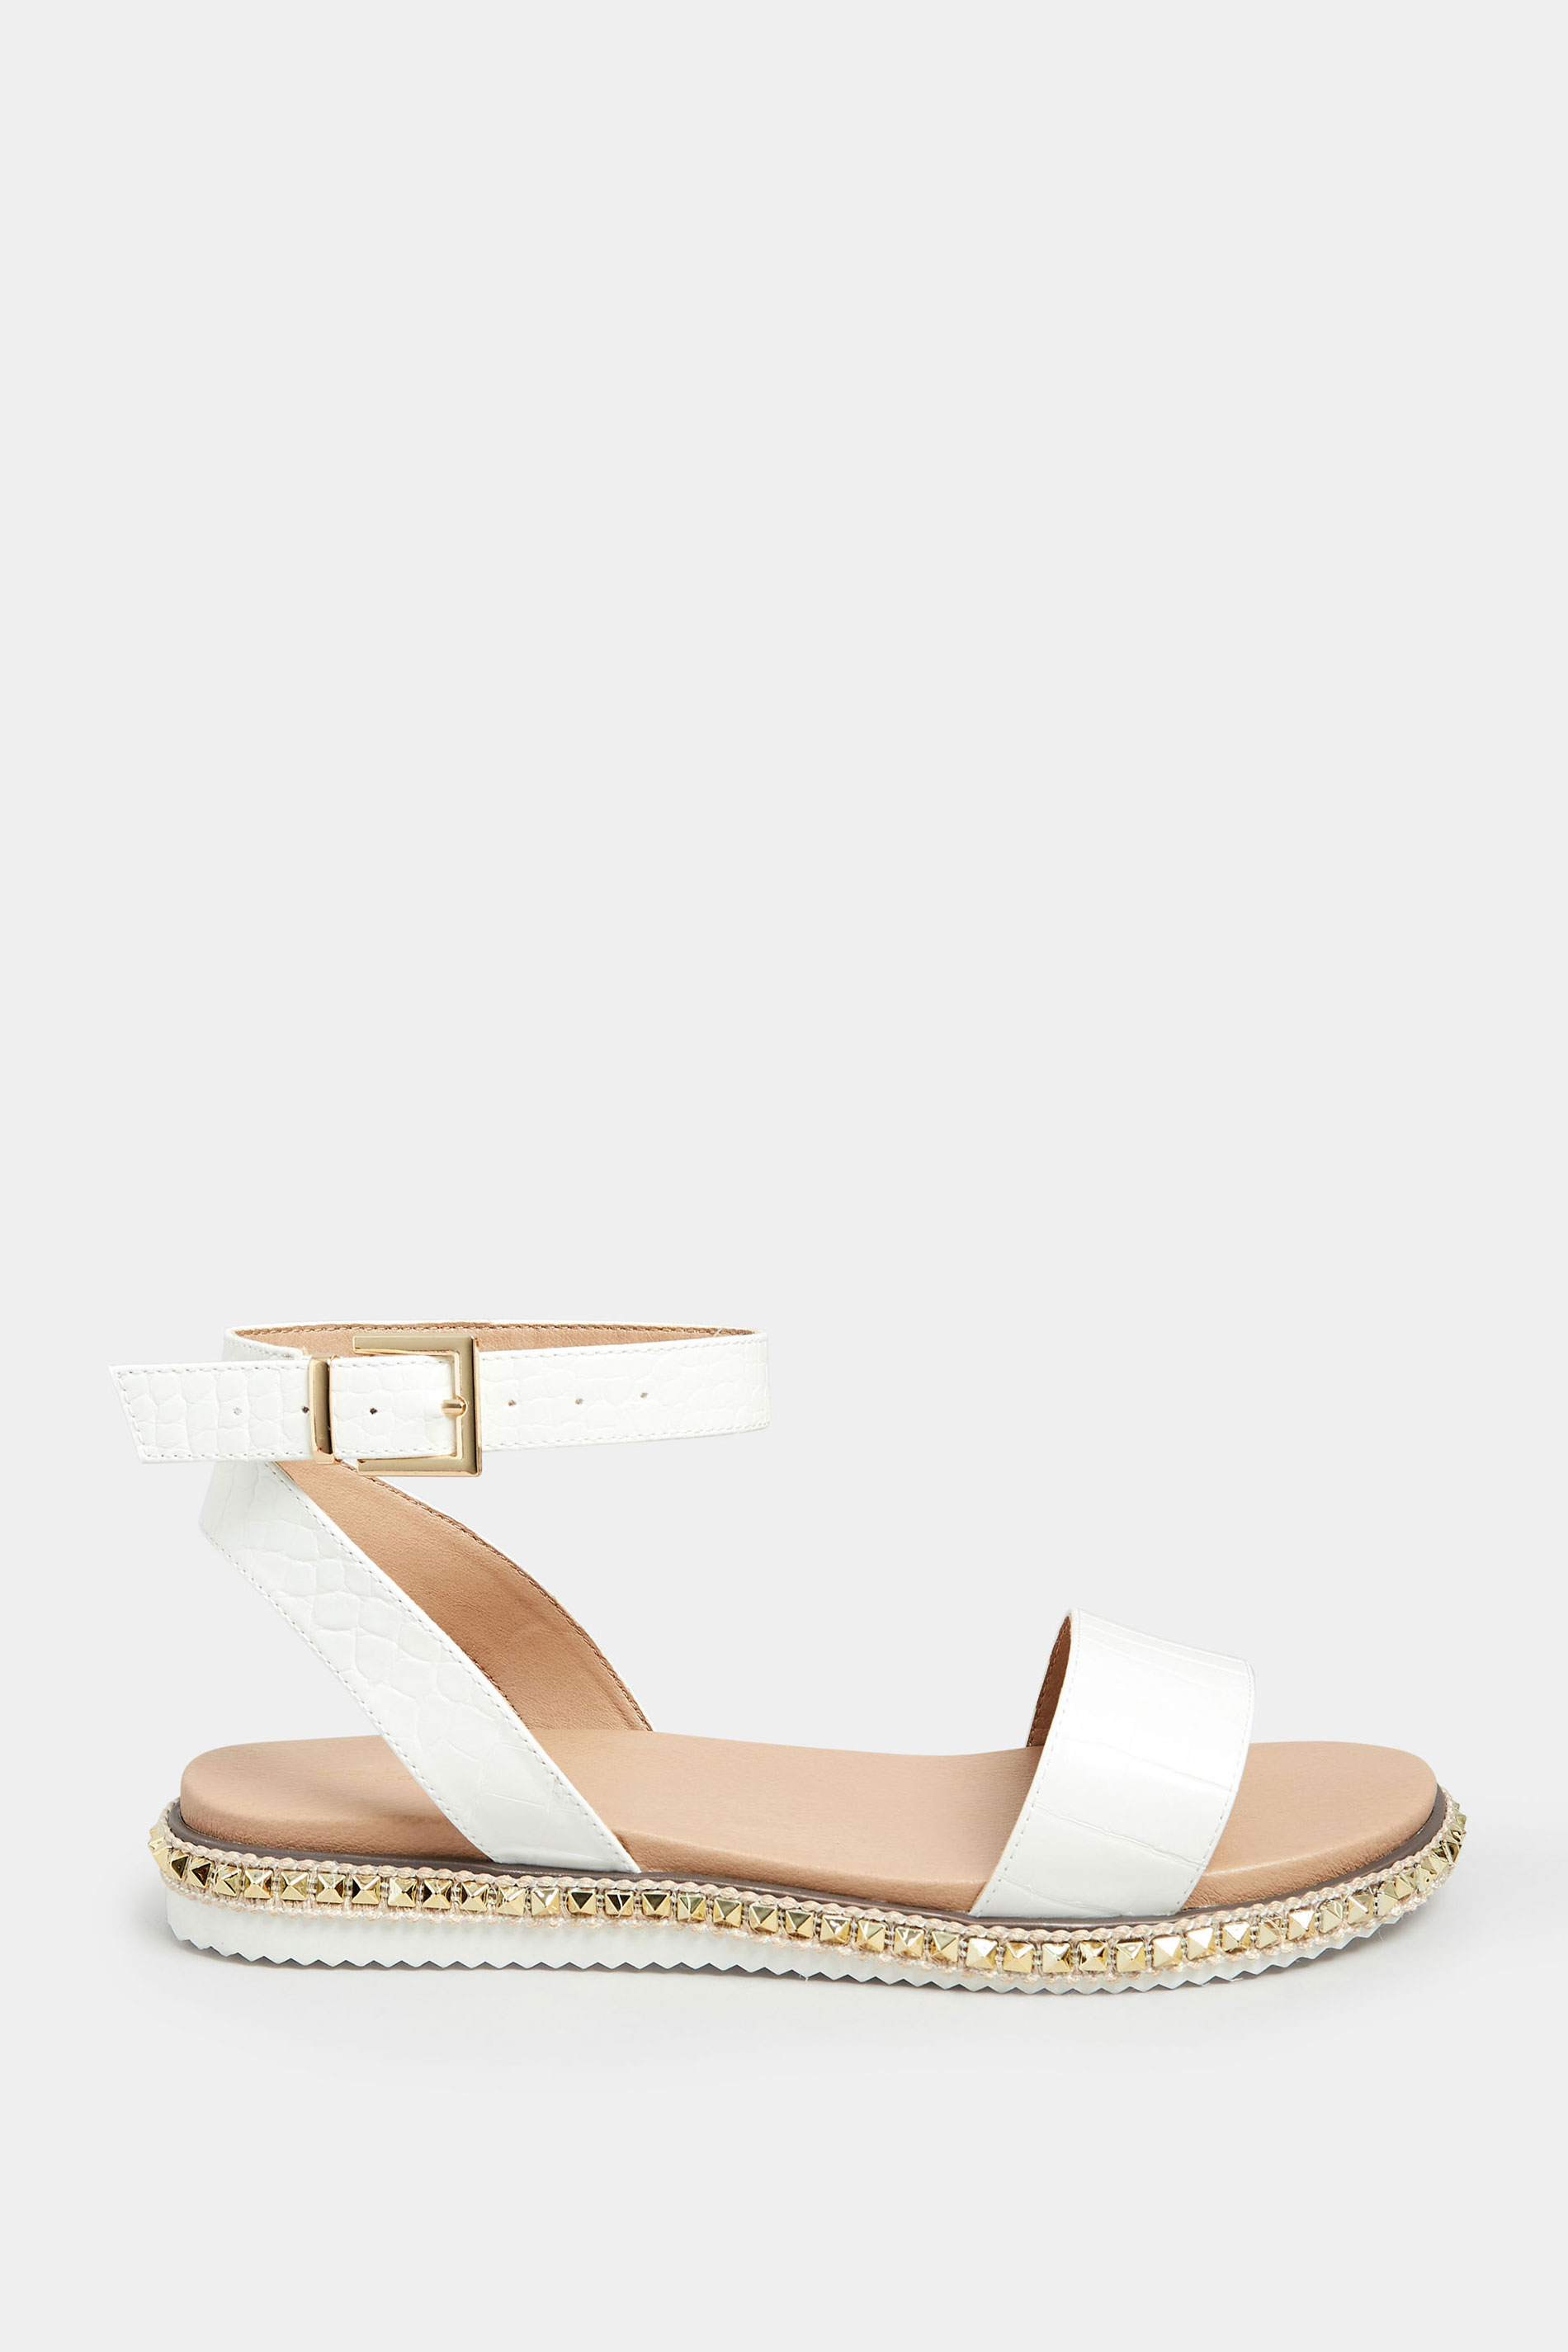 White Croc Faux Leather Studded Sandals In Extra Wide EEE Fit | Yours Clothing 3